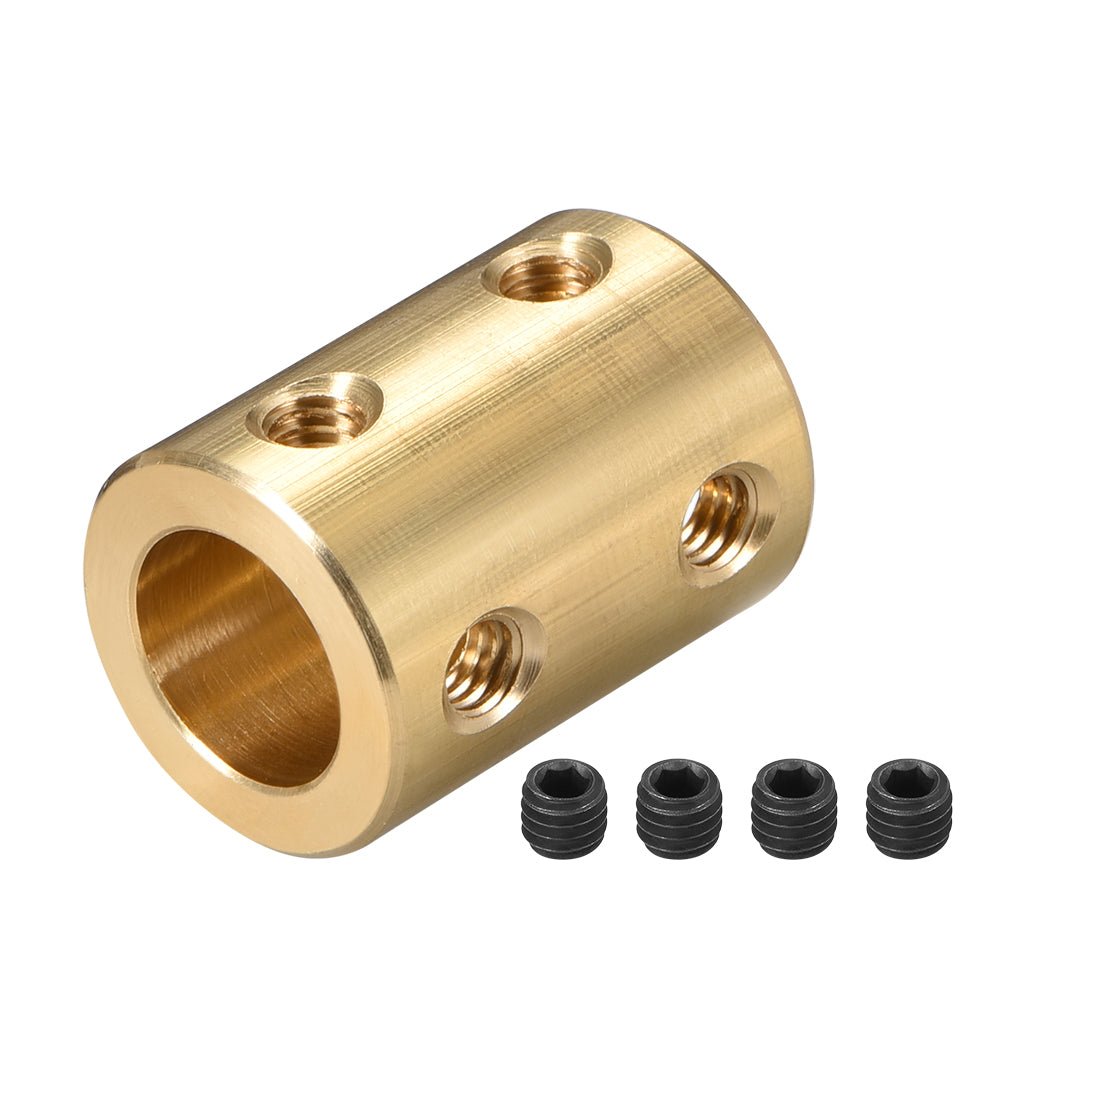 uxcell Uxcell Shaft Coupling 10mm to 10mm Bore L22xD16 Robot Motor Wheel Rigid Coupler Connector Gold Tone